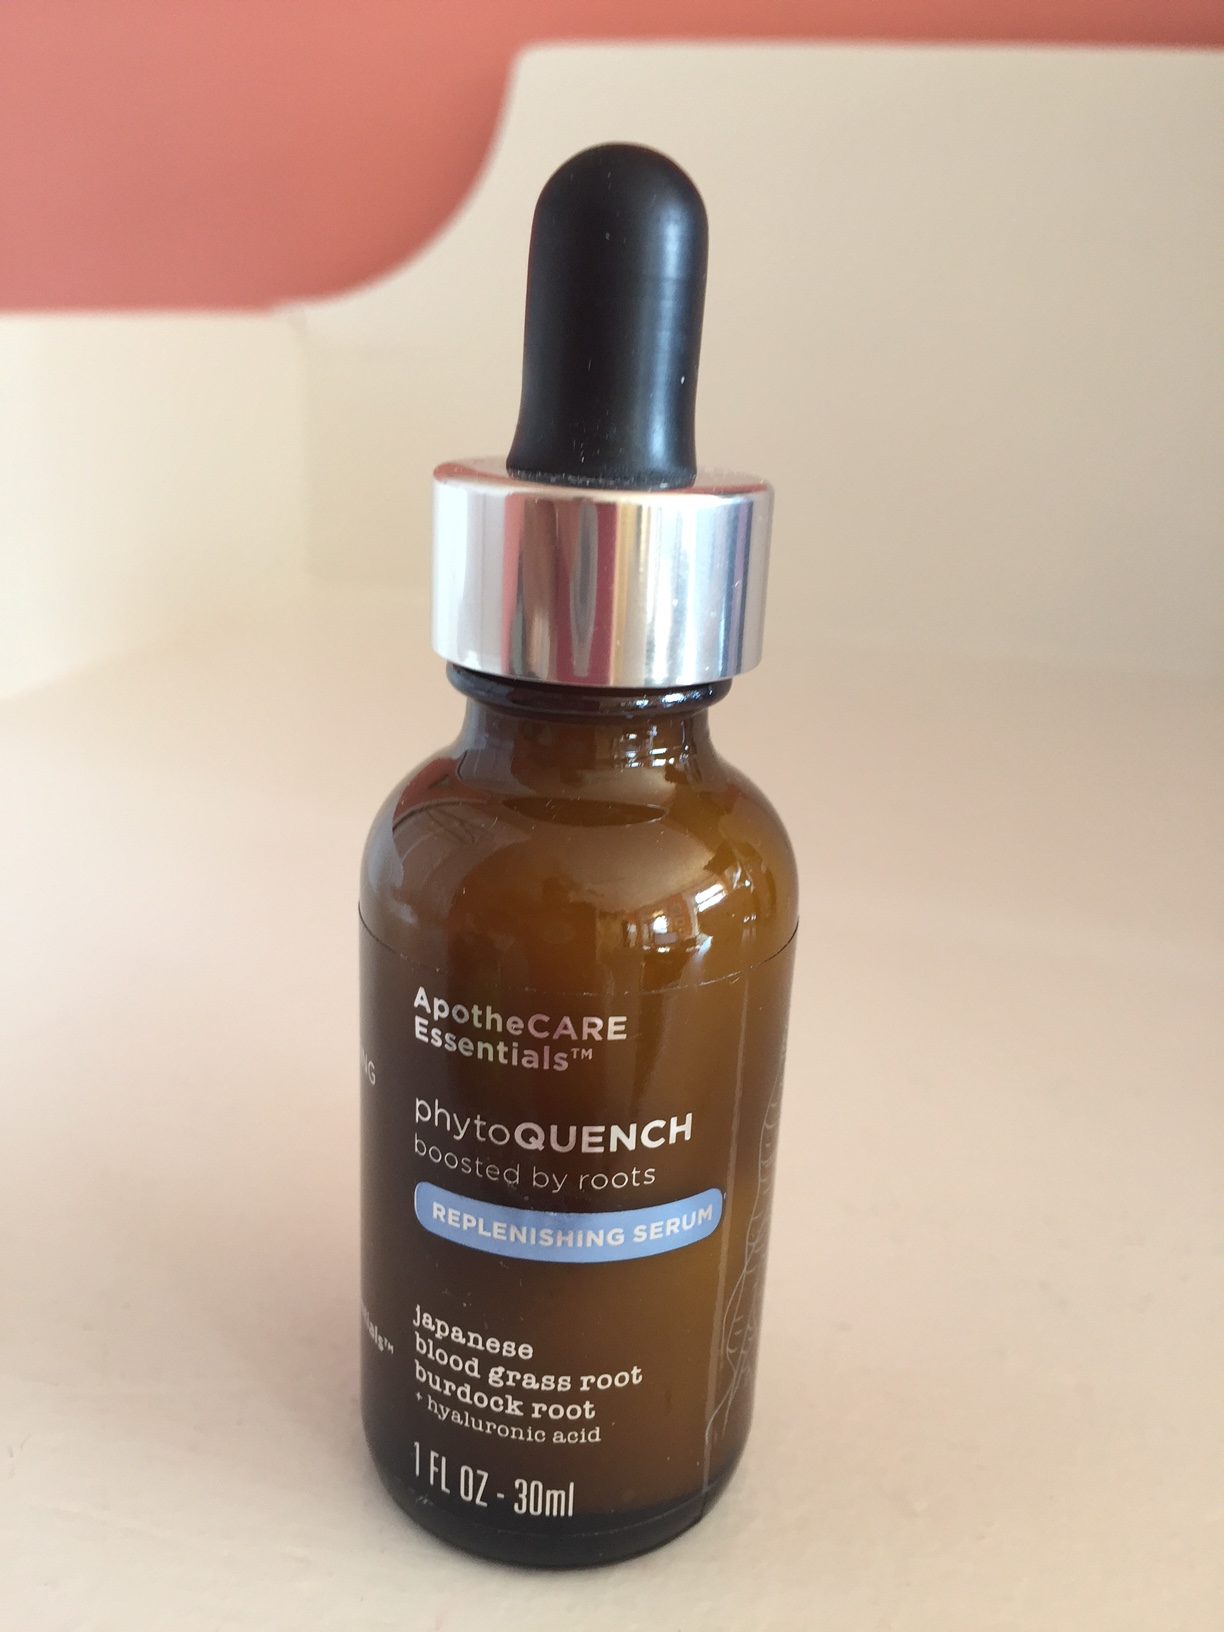 Review, Ingredients, Photos, Skincare Trend, 2019, 2020: PhytoQuench Replenishing Serum